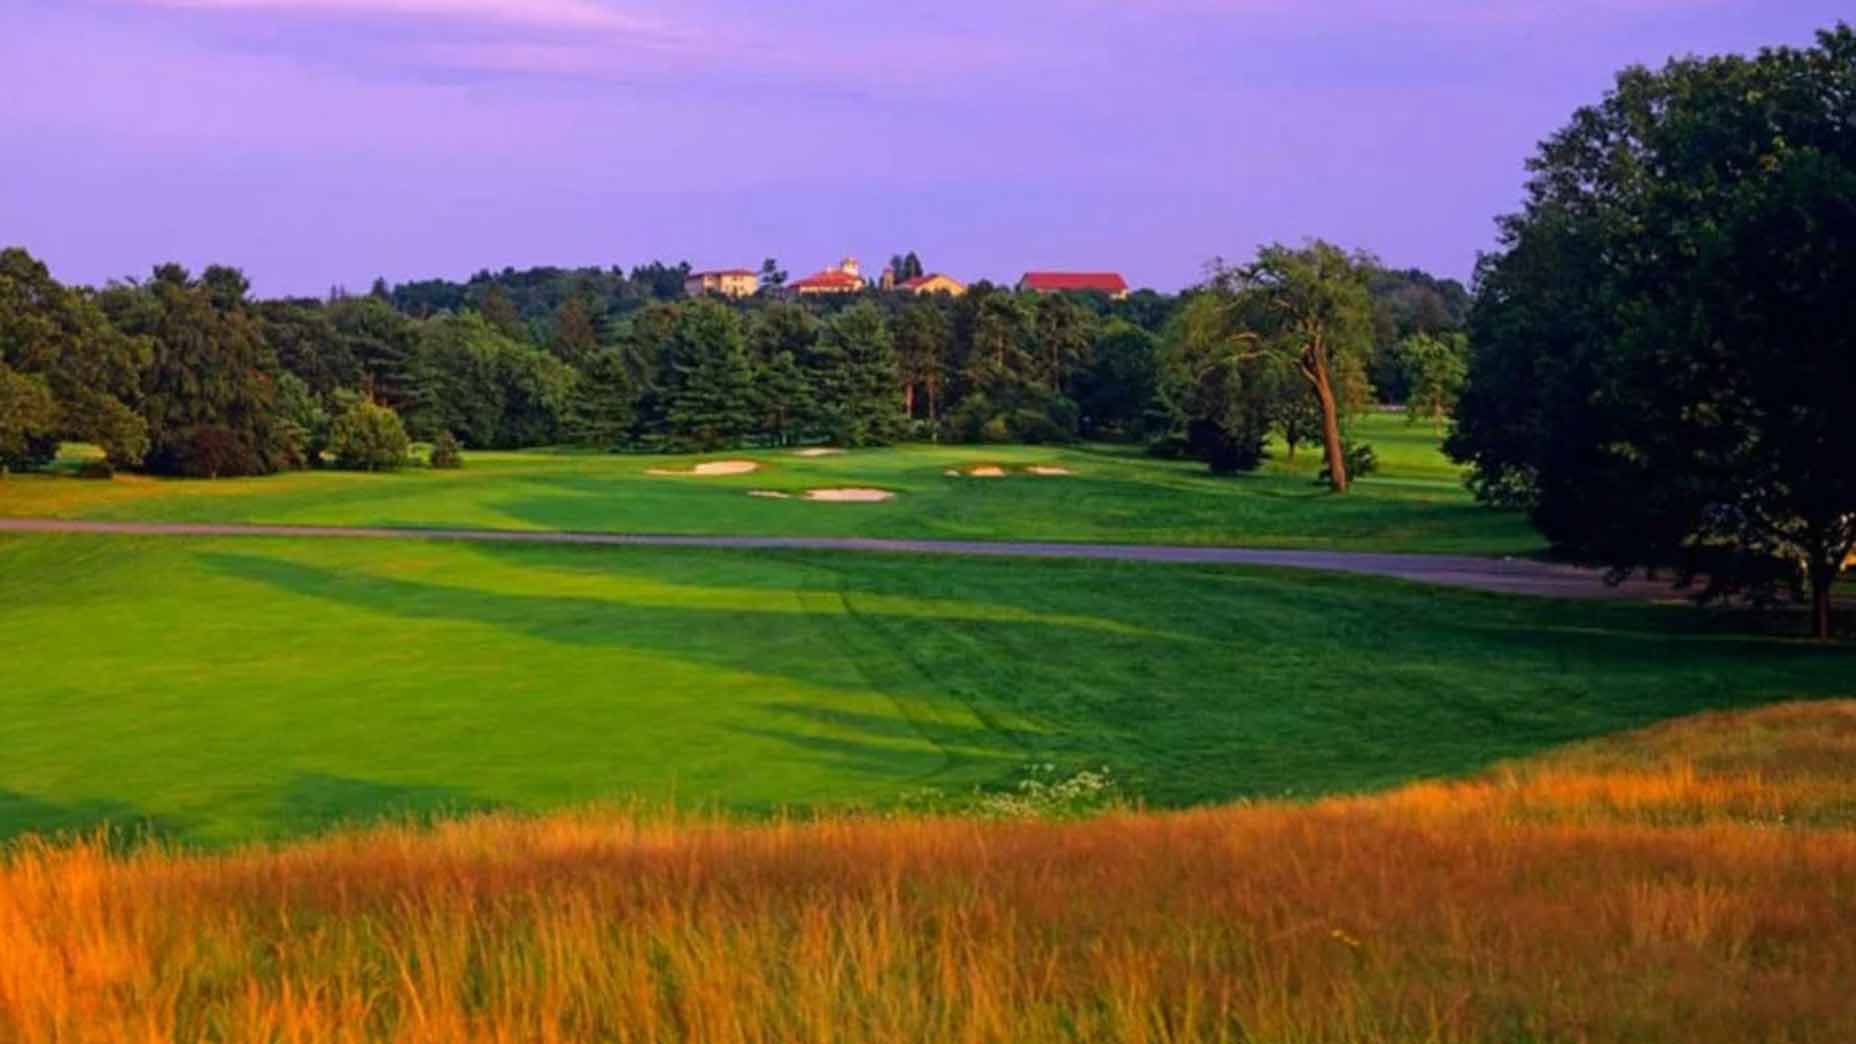 The Country Club in Brookline is No. 1 in Massachusetts.